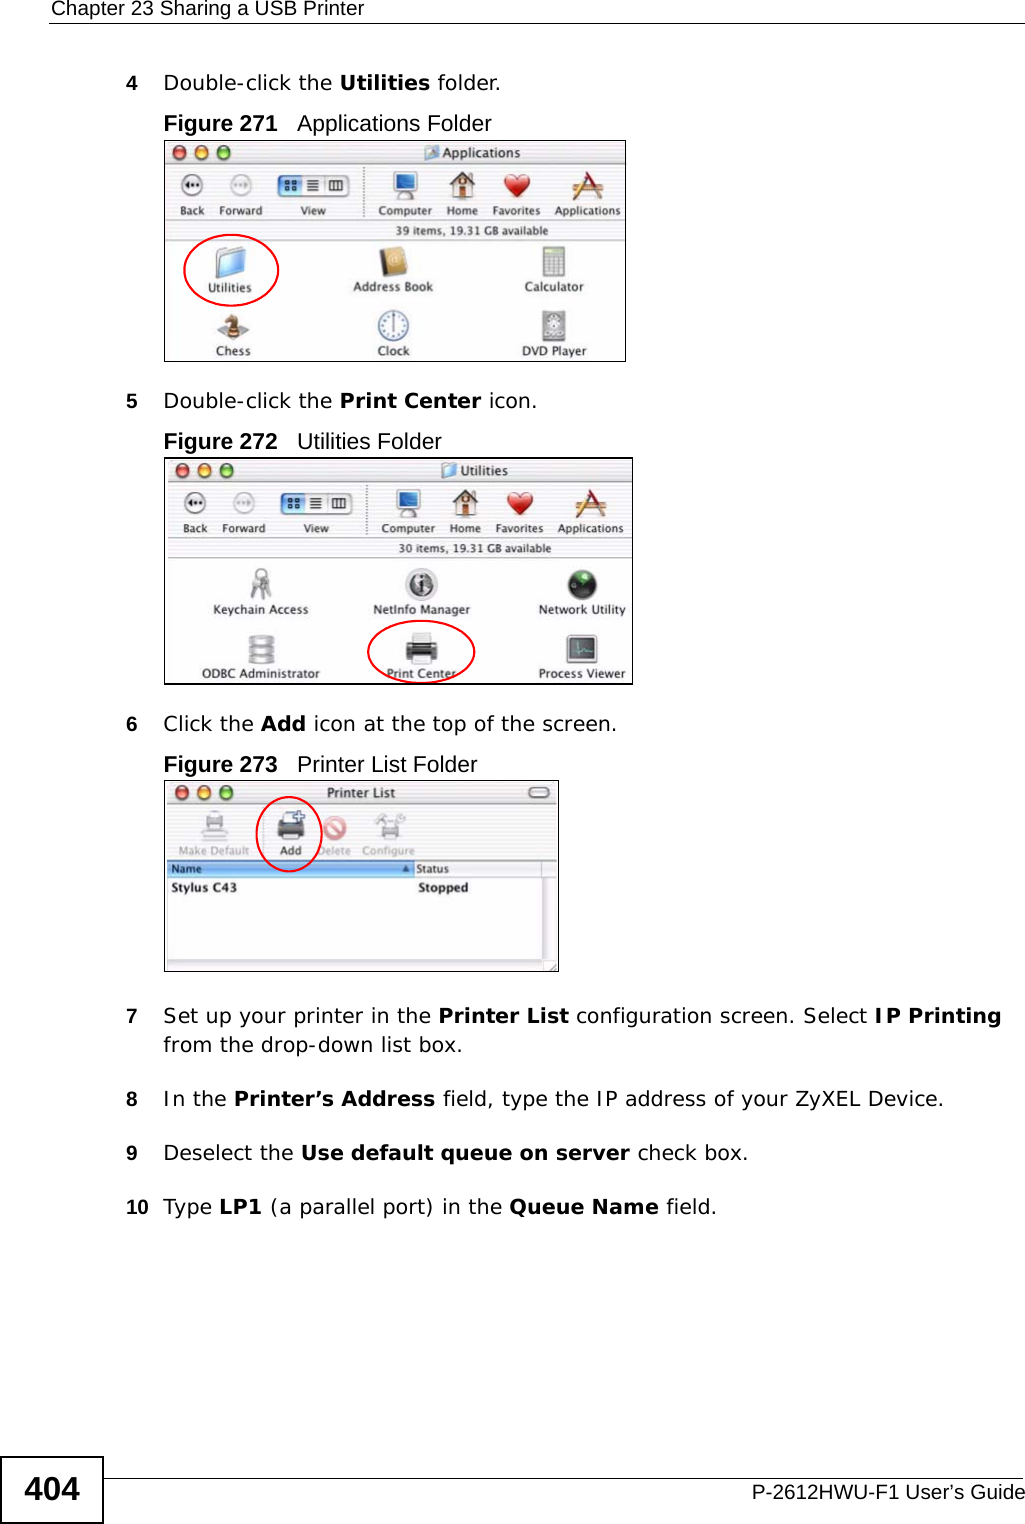 Chapter 23 Sharing a USB PrinterP-2612HWU-F1 User’s Guide4044Double-click the Utilities folder.Figure 271   Applications Folder5Double-click the Print Center icon.Figure 272   Utilities Folder6Click the Add icon at the top of the screen.Figure 273   Printer List Folder7Set up your printer in the Printer List configuration screen. Select IP Printing from the drop-down list box.8In the Printer’s Address field, type the IP address of your ZyXEL Device.9Deselect the Use default queue on server check box.10 Type LP1 (a parallel port) in the Queue Name field.